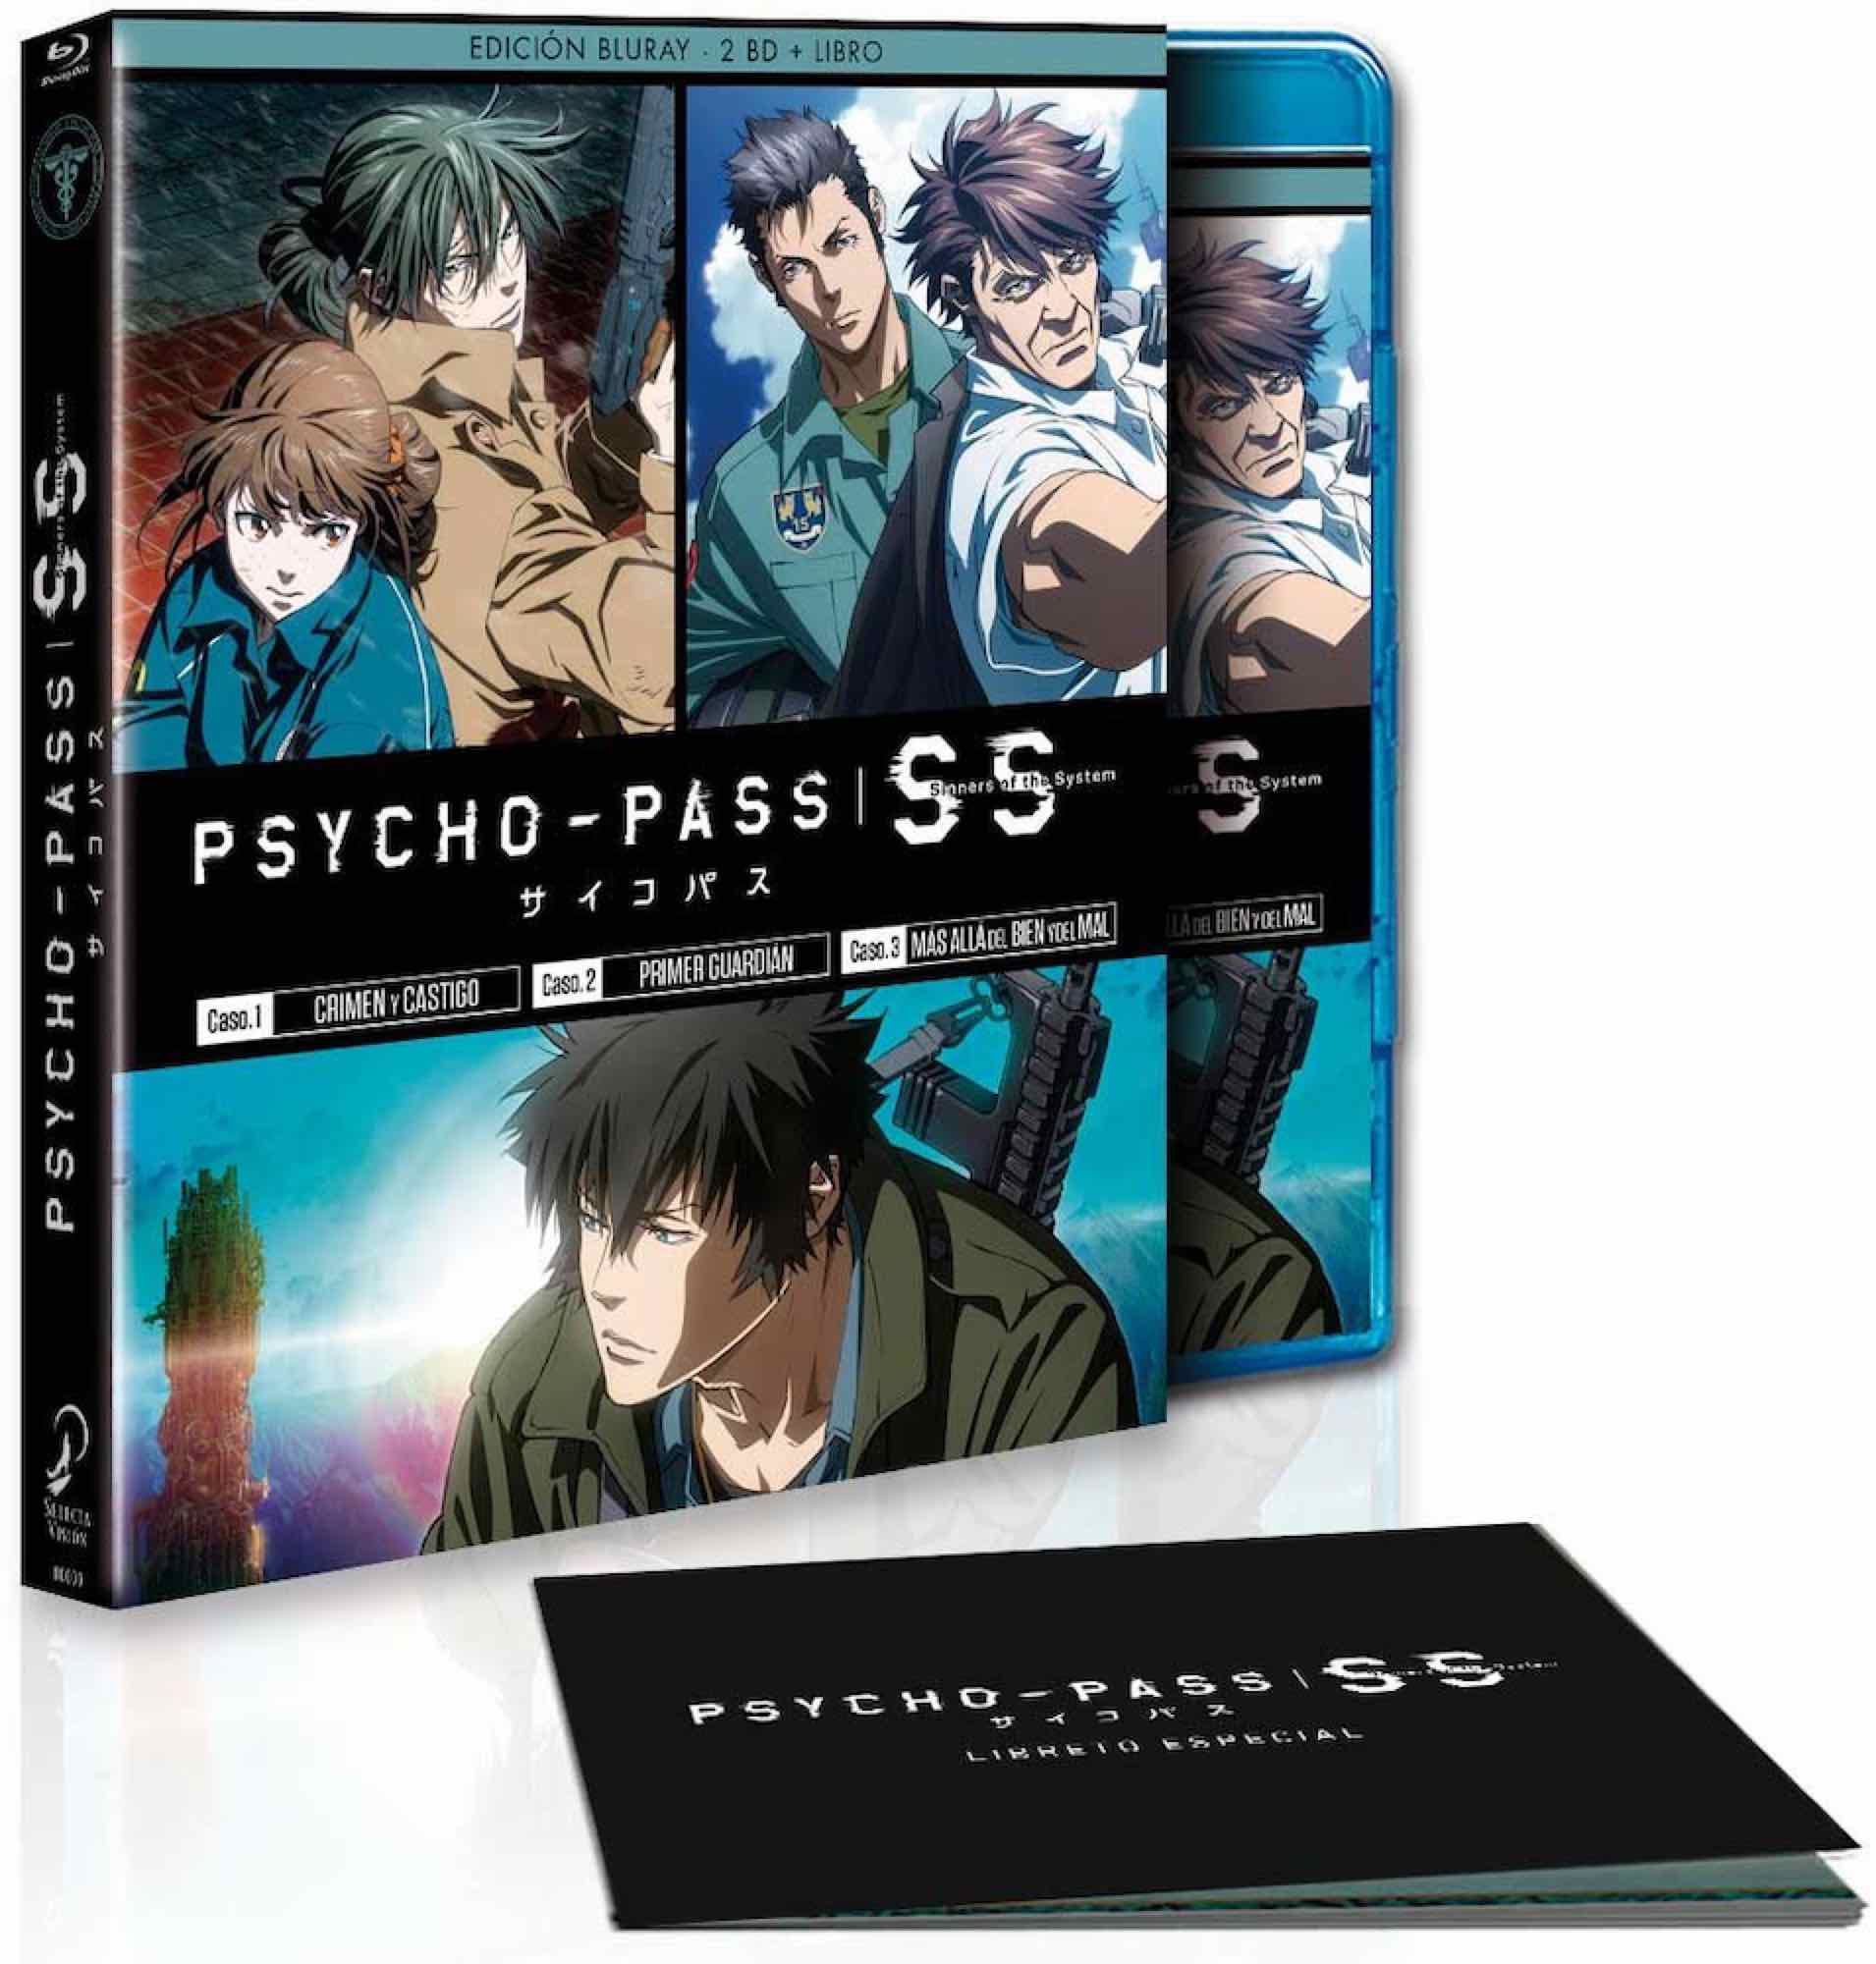 BD PSYCHO PASS SINNERS OF THE SYSTEM BLURAY COLECCIONISTAS